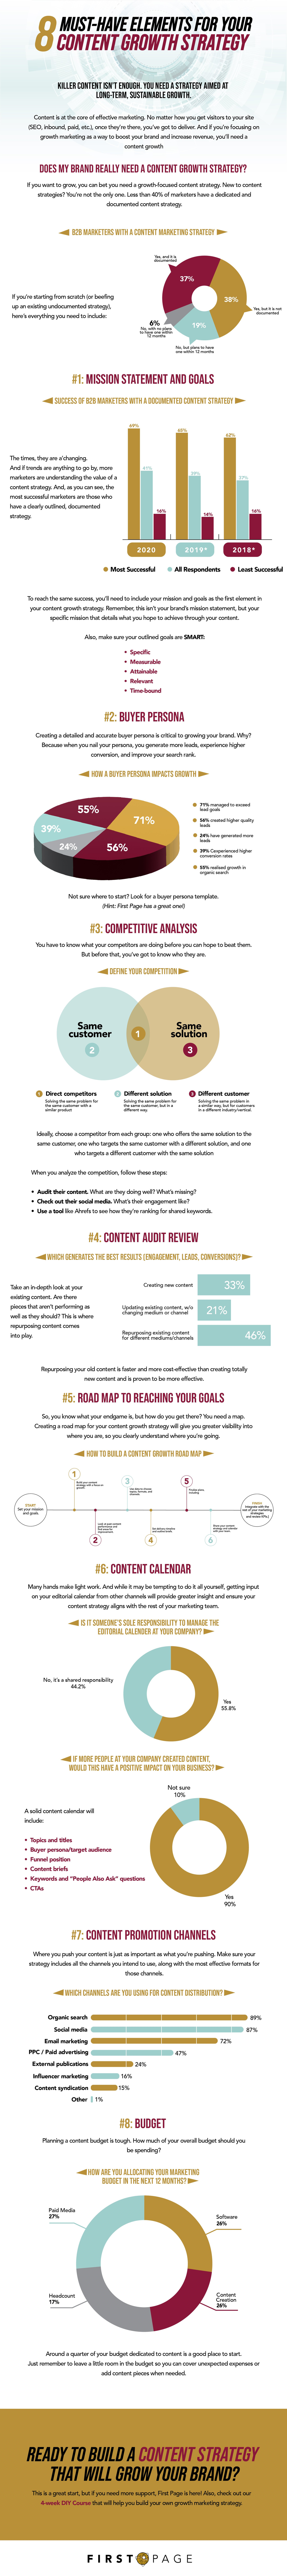 8 Must-Have Elements for Your Content Growth Strategy [INFOGRAPHIC]